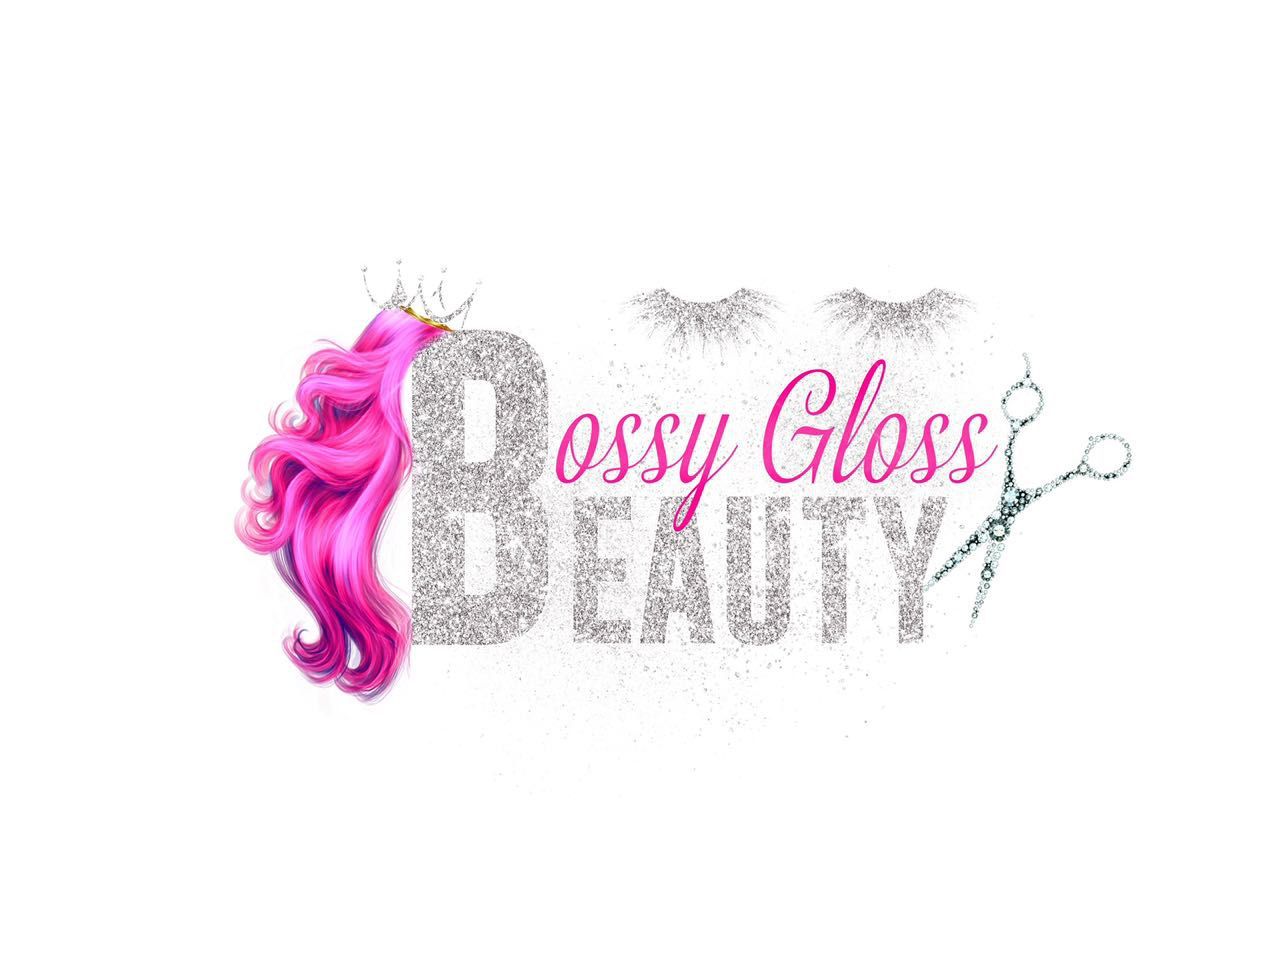 BlossyGlossBeauty, 6160 NE highway 99, 205, Suite 8, Vancouver, 98665